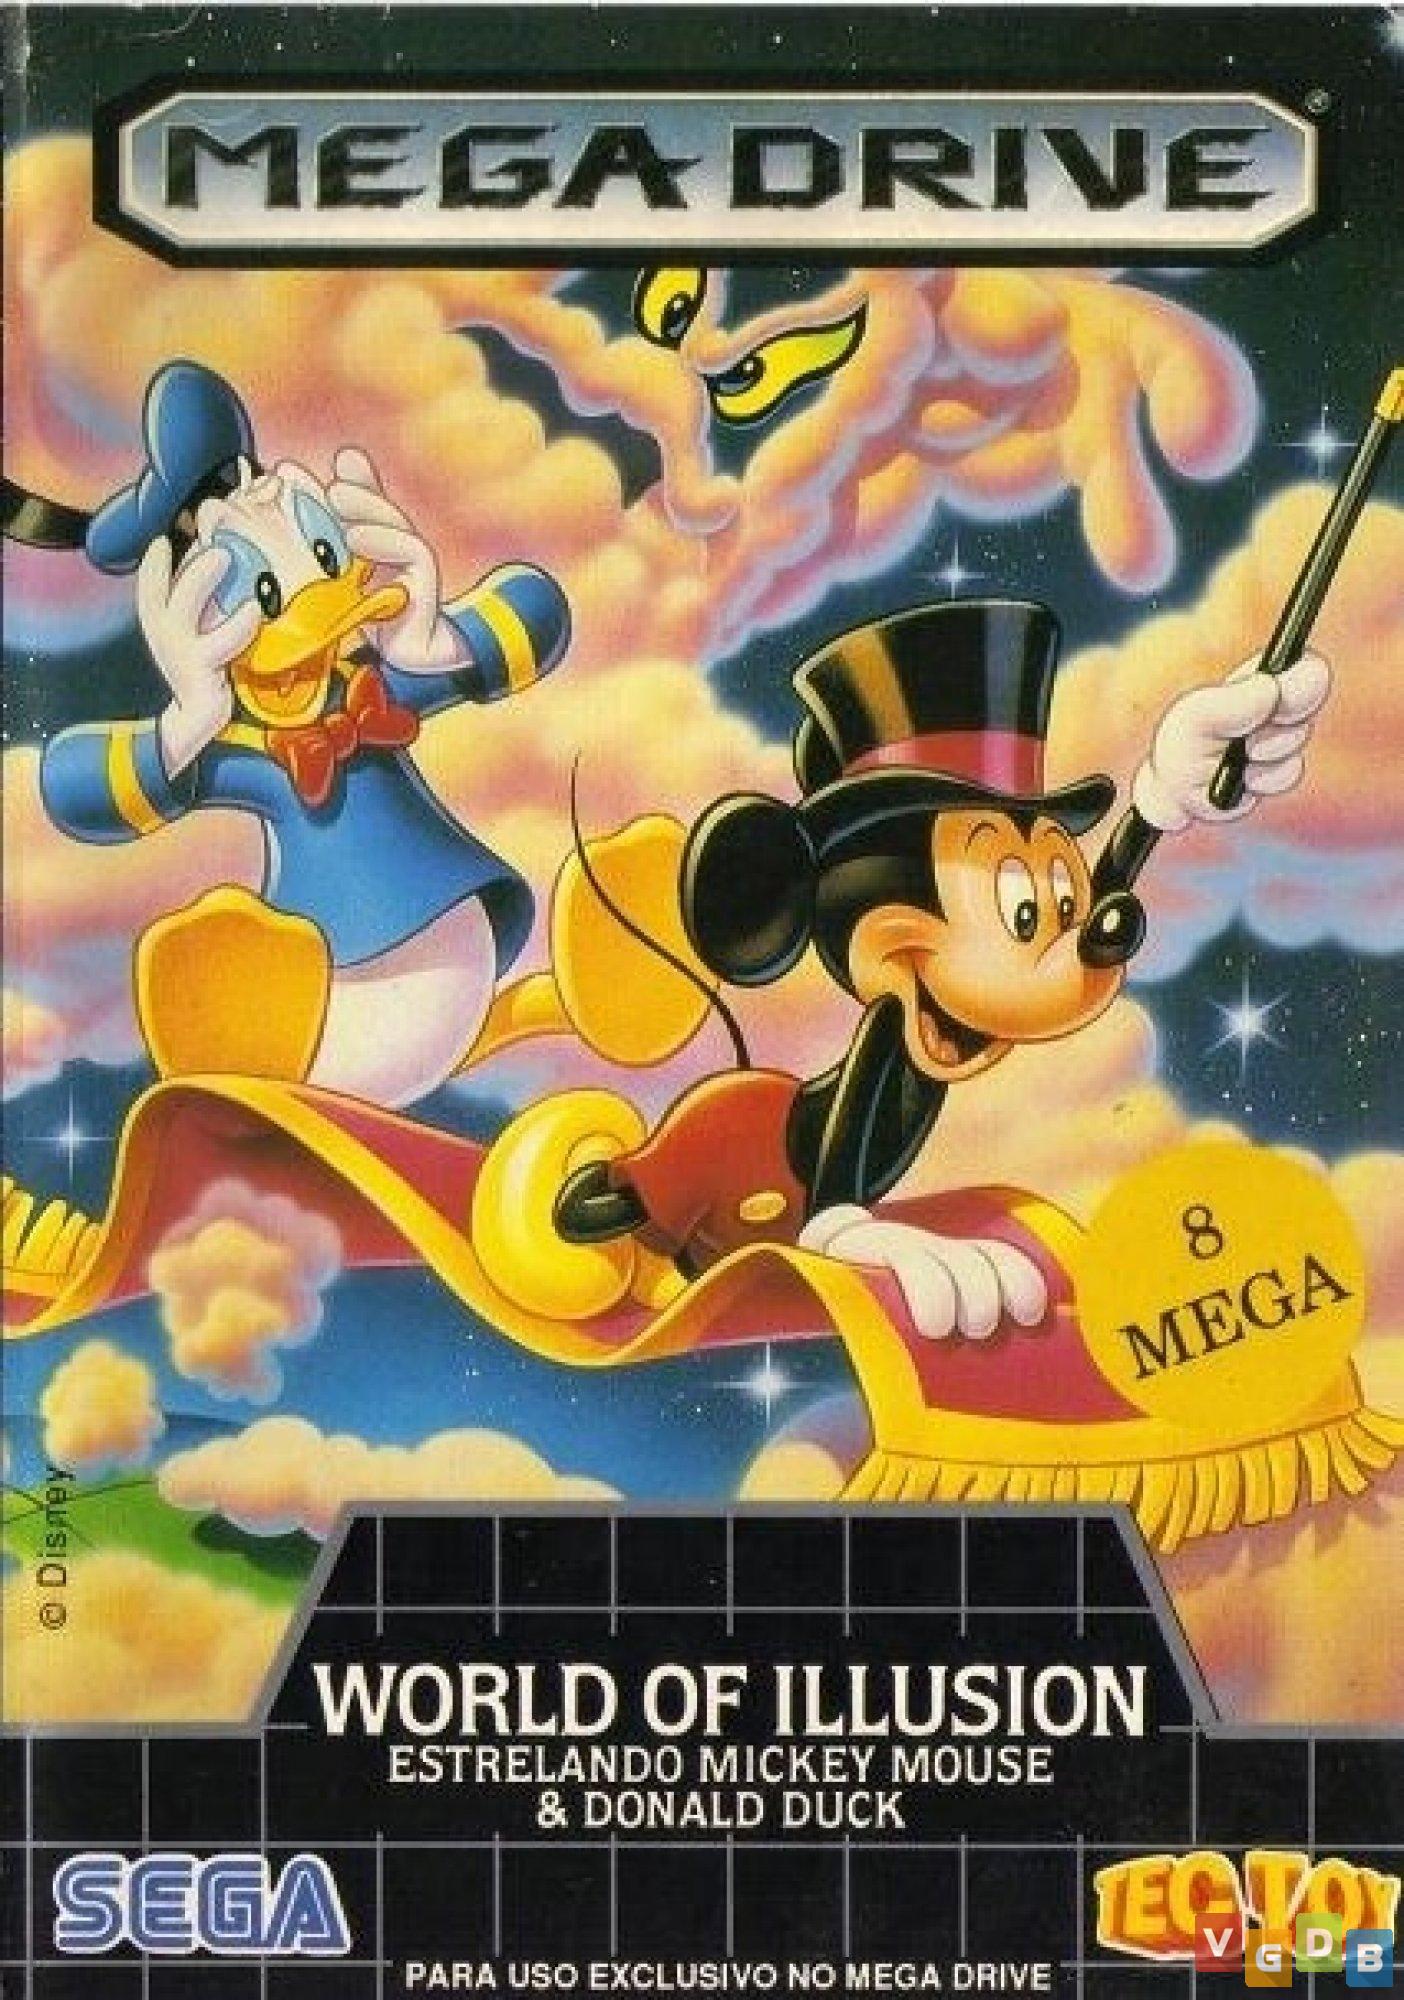 Игры сега микки. World of Illusion starring Mickey Mouse and Donald Duck. Mickey Mouse World of Illusion Sega. Sega Mega Drive World of Illusion.